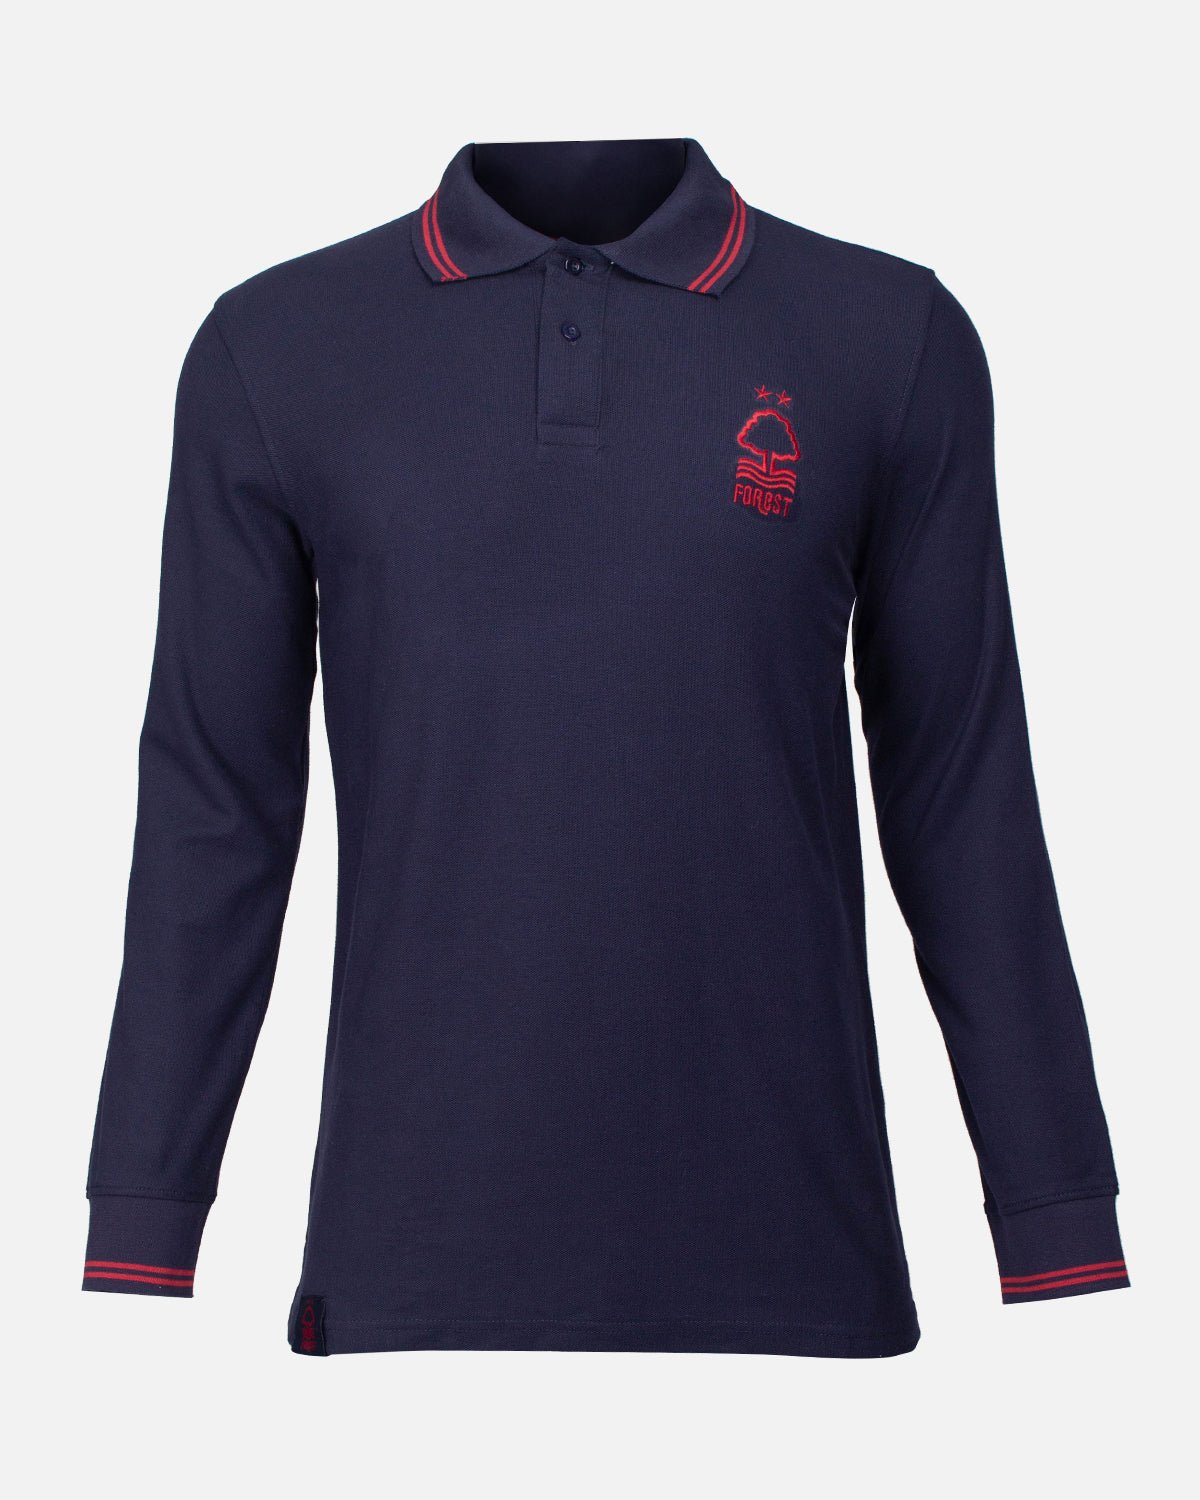 NFFC Navy Essential Long Sleeve Polo - Nottingham Forest FC